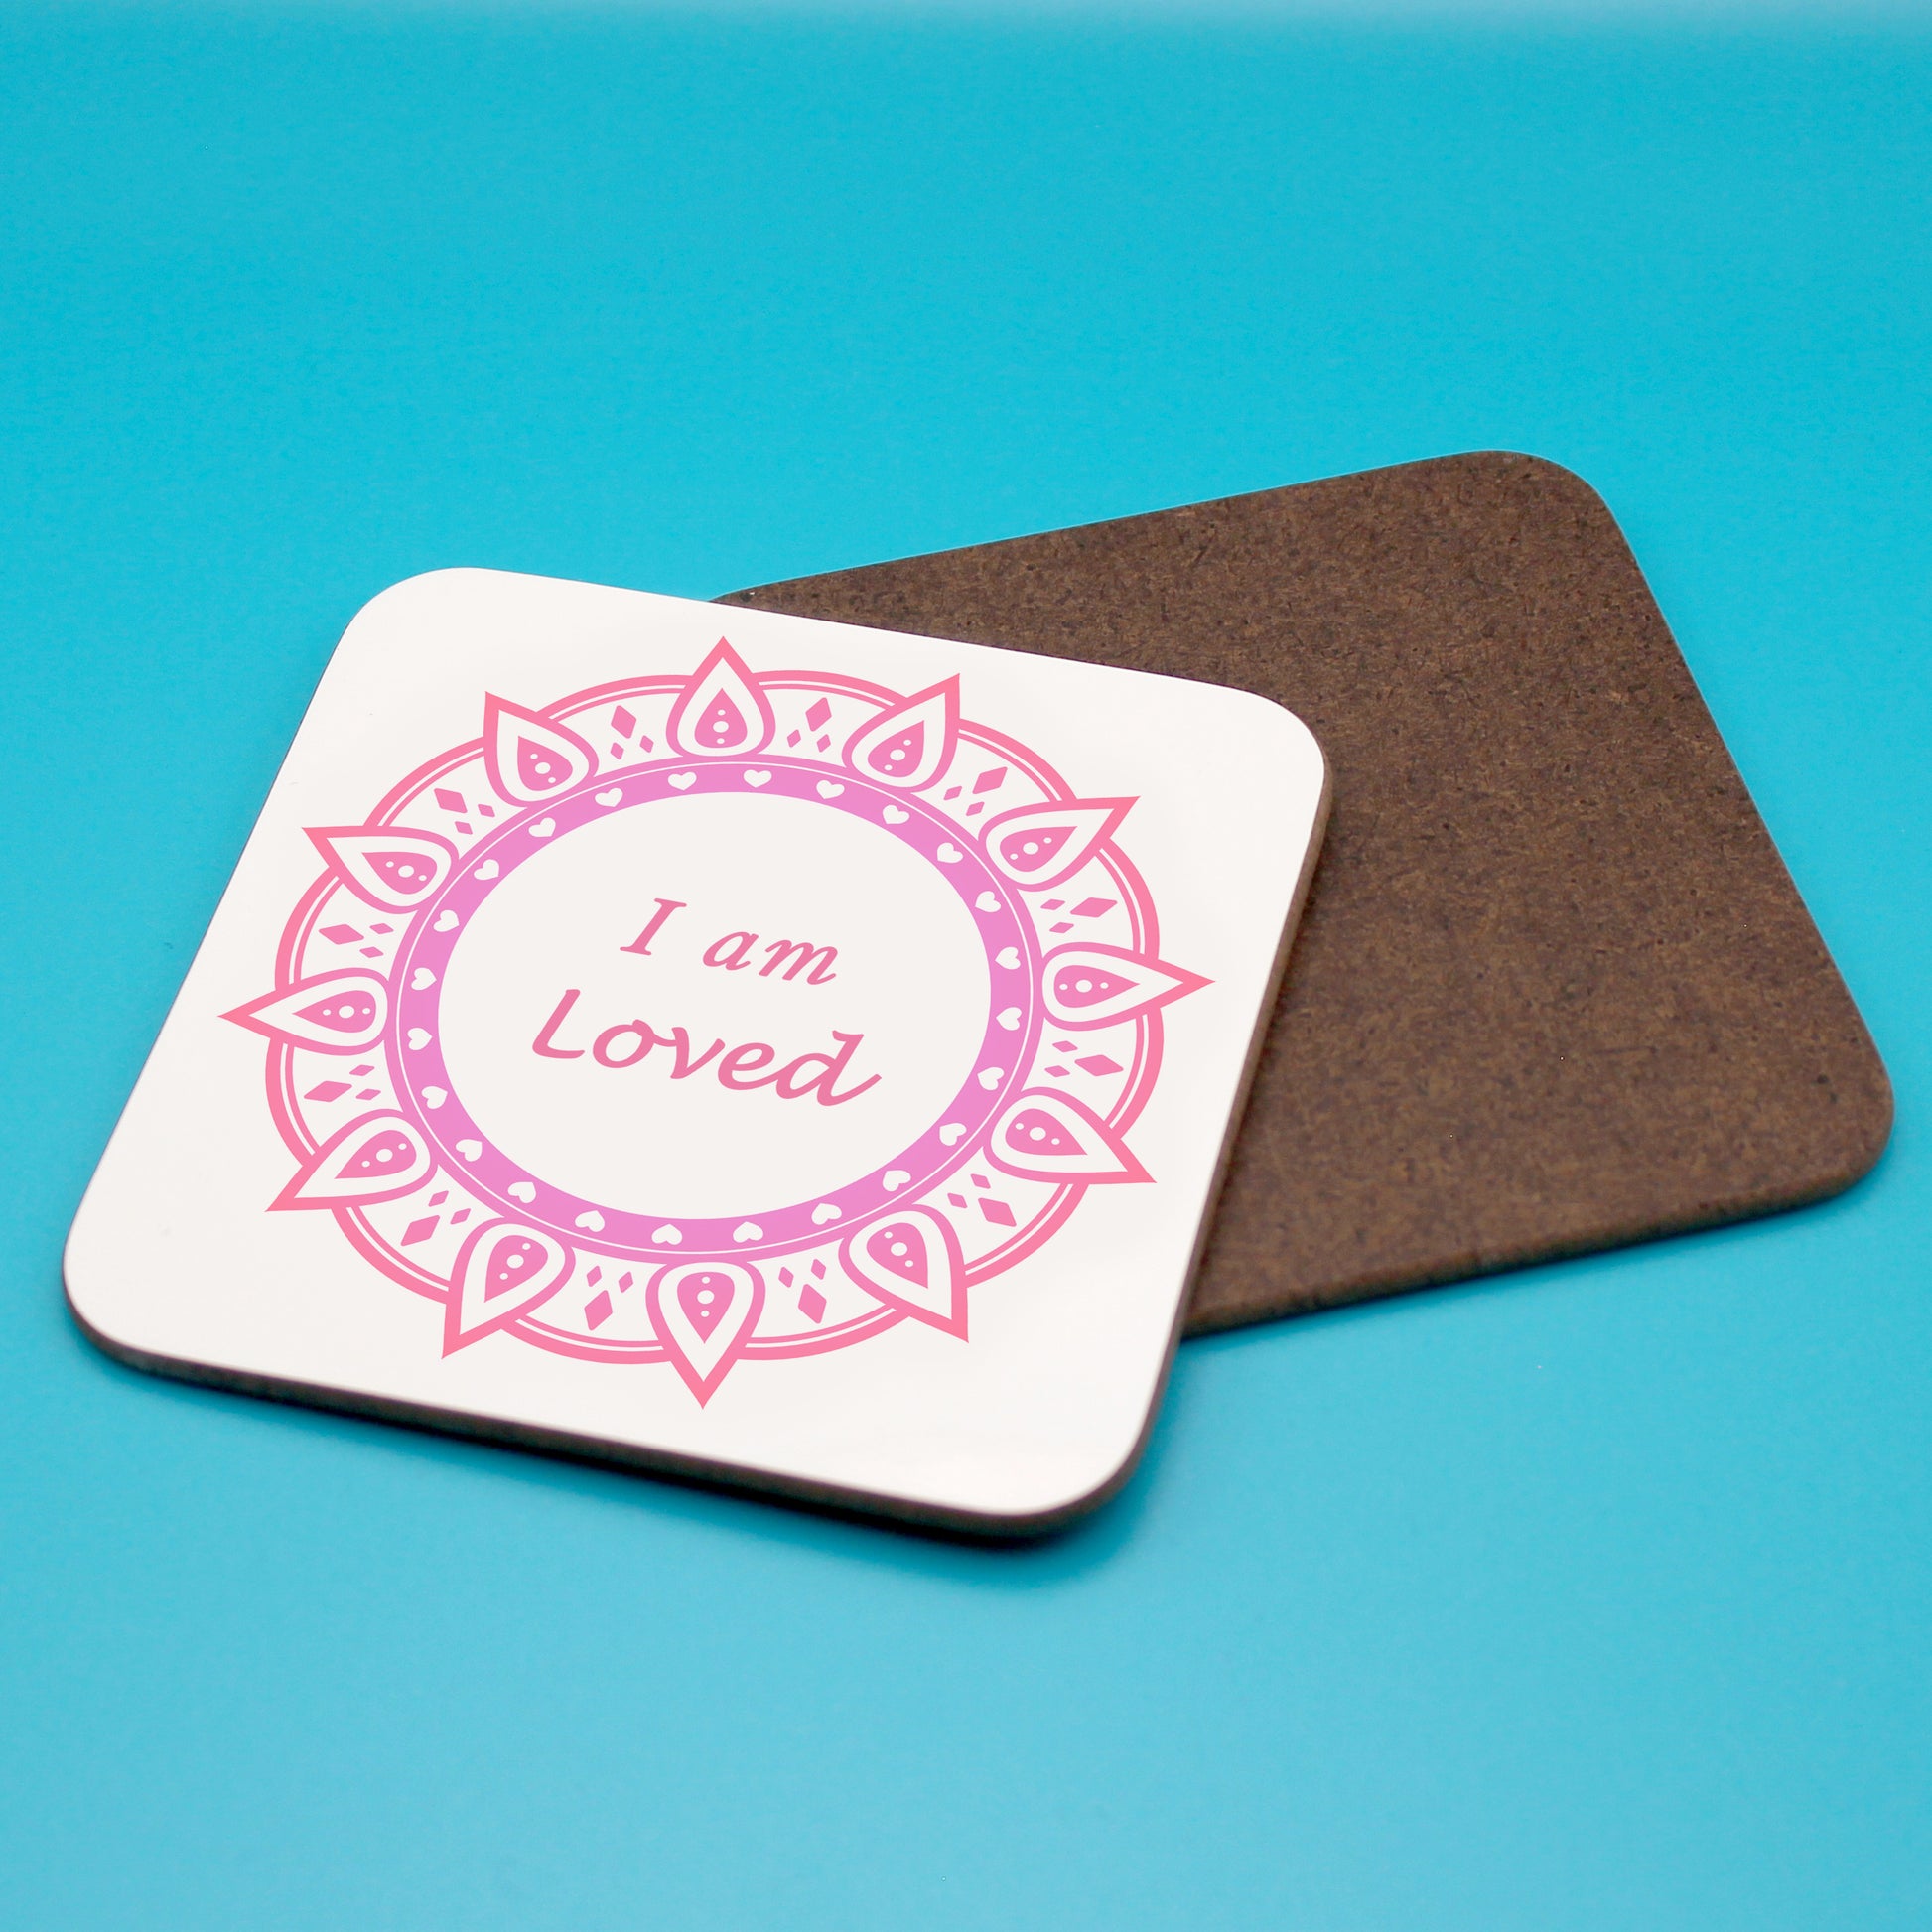 White personal affirmation coaster with pink and red mandala design. Daily affirmation reads I am Loved. Coaster underneath shows wood backing